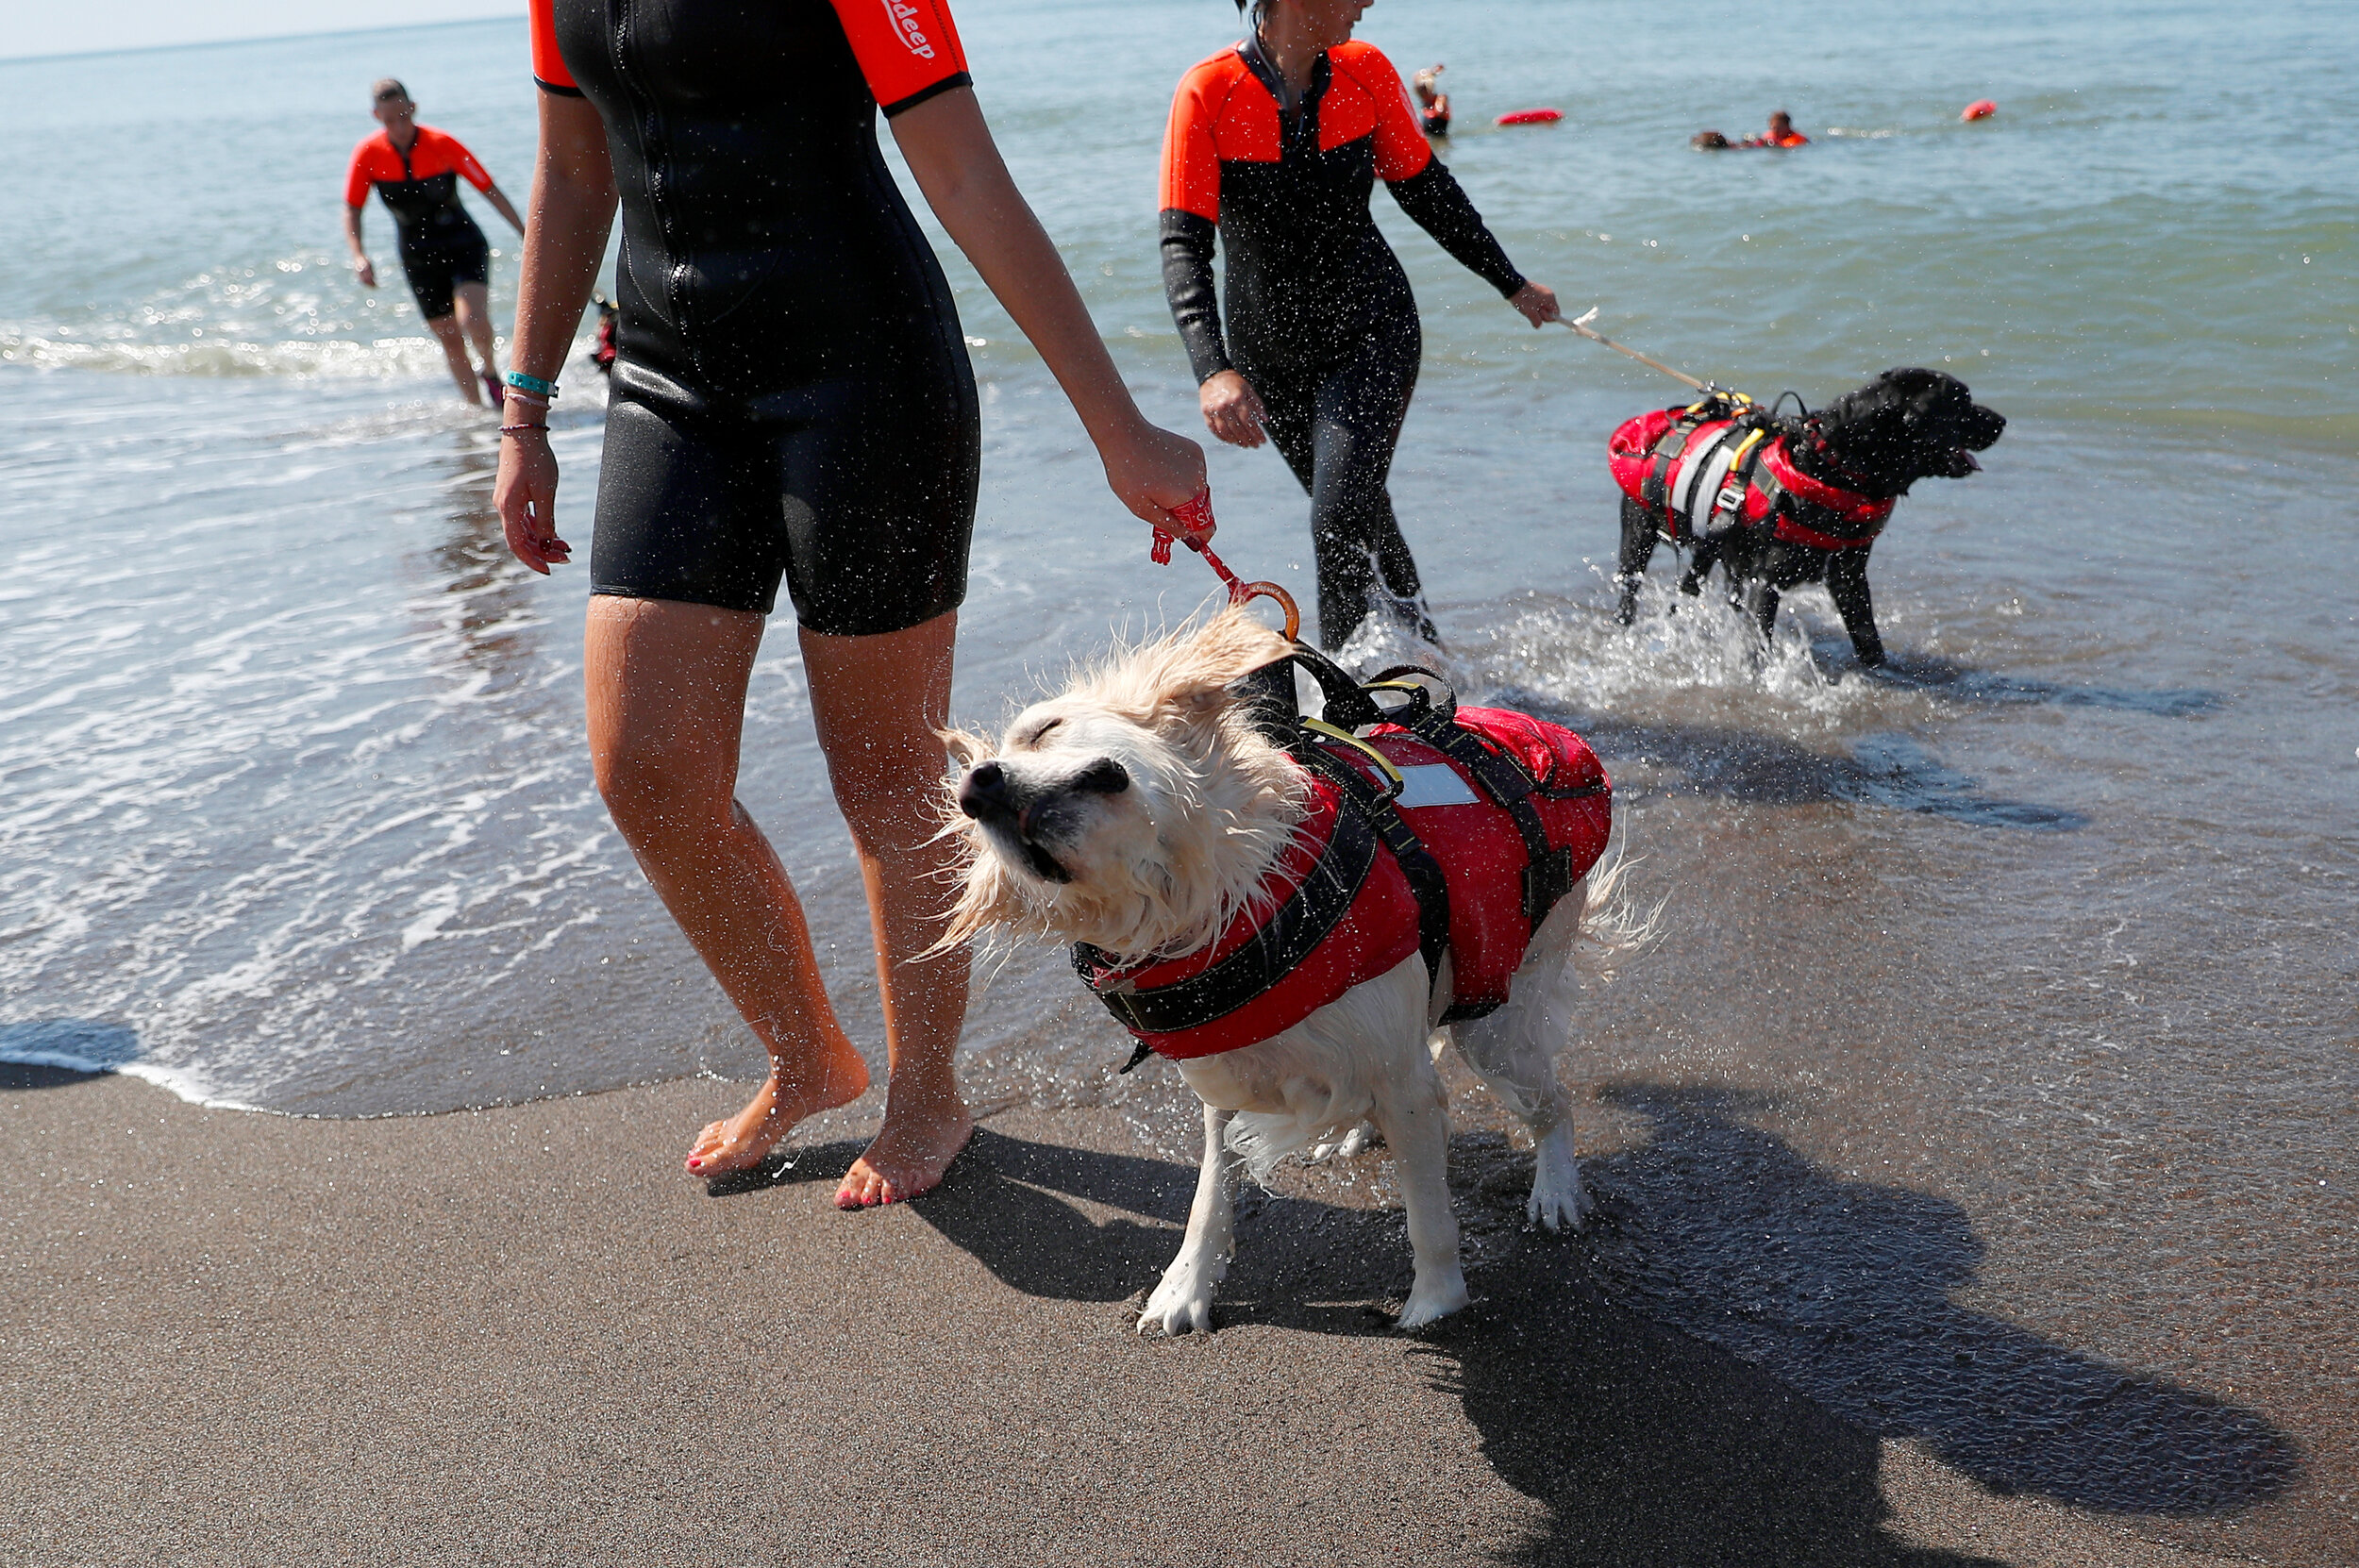  An all-female group of canine rescuers from the Italian School of Rescue Dogs (La Scuola Italiana Cani Salvataggio) attend a training session with their dogs before patrolling the beach to ensure swimmers can enjoy their time at the sea in safety, i